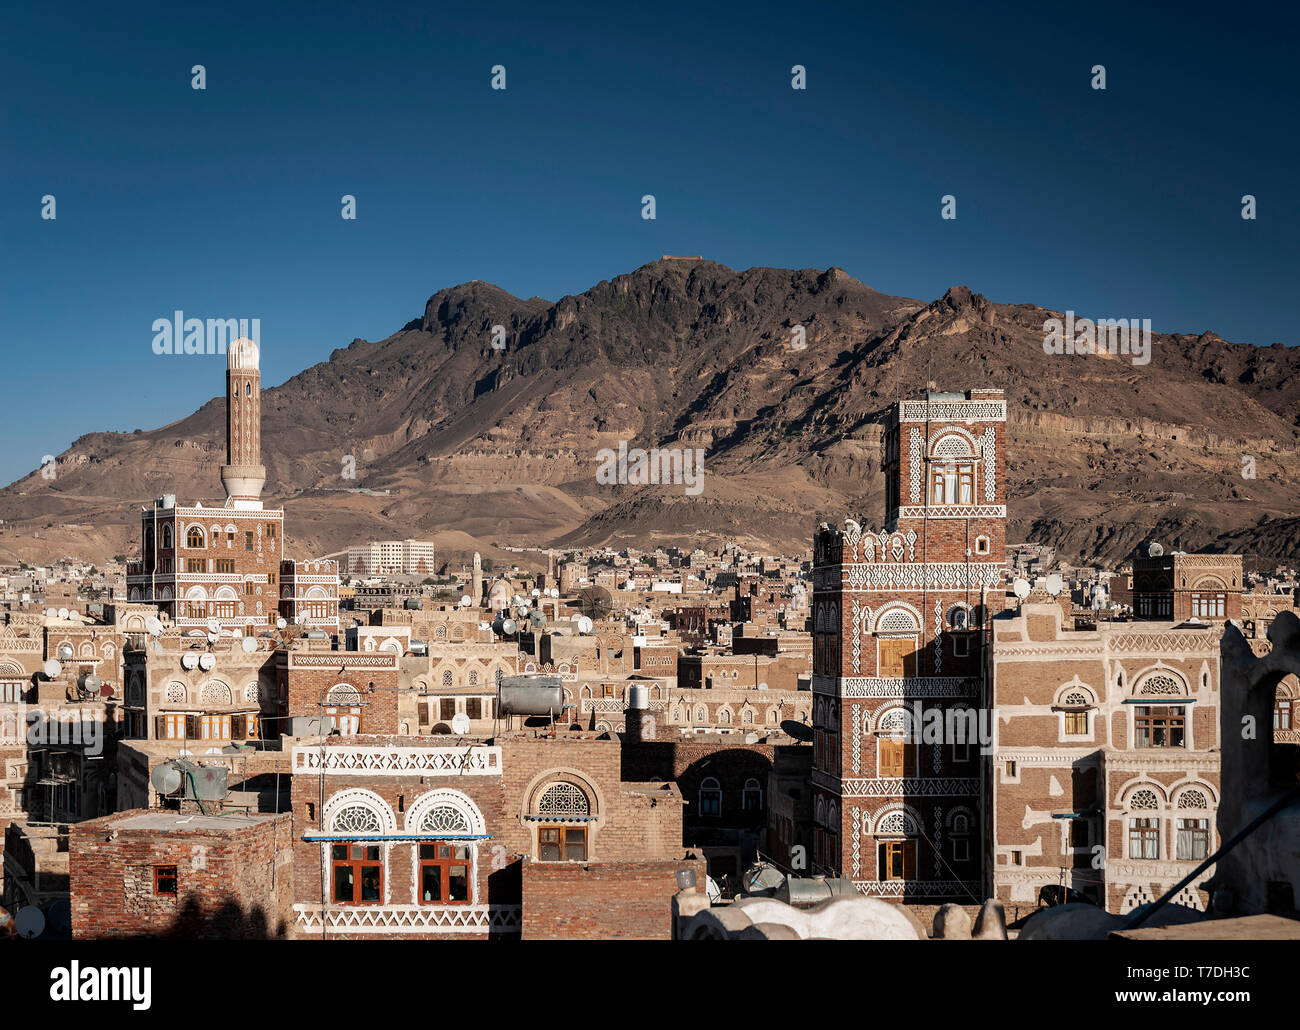 view of  downtown sanaa city old town traditional arabic architecture skyline in yemen Stock Photo